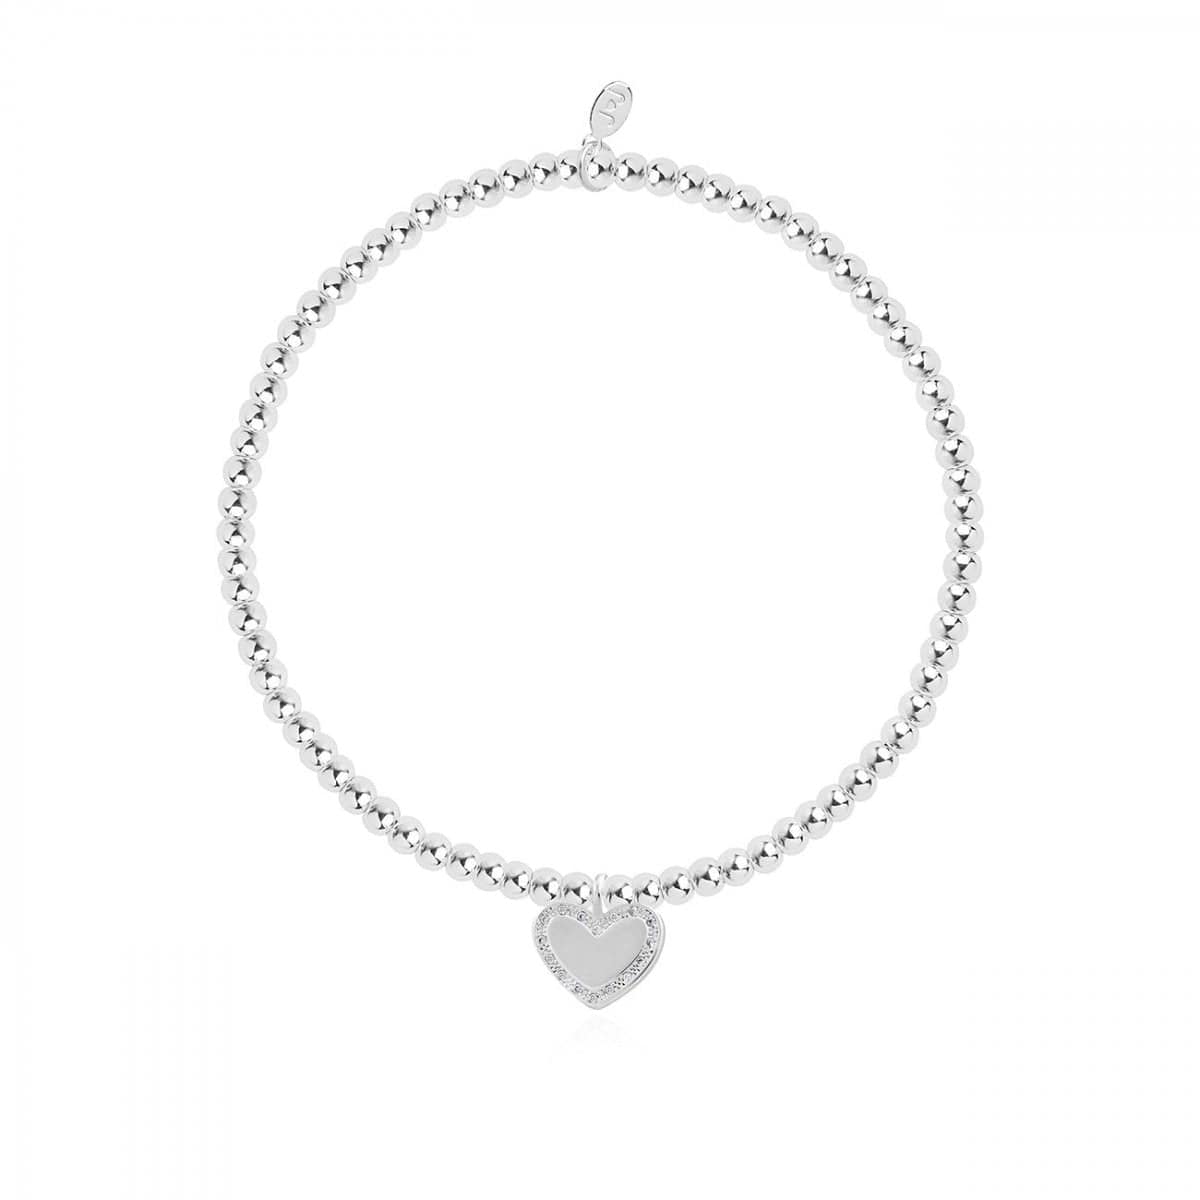 Joma Jewellery Bracelet Joma Jewellery Bracelet - a little Happy Mother's Day